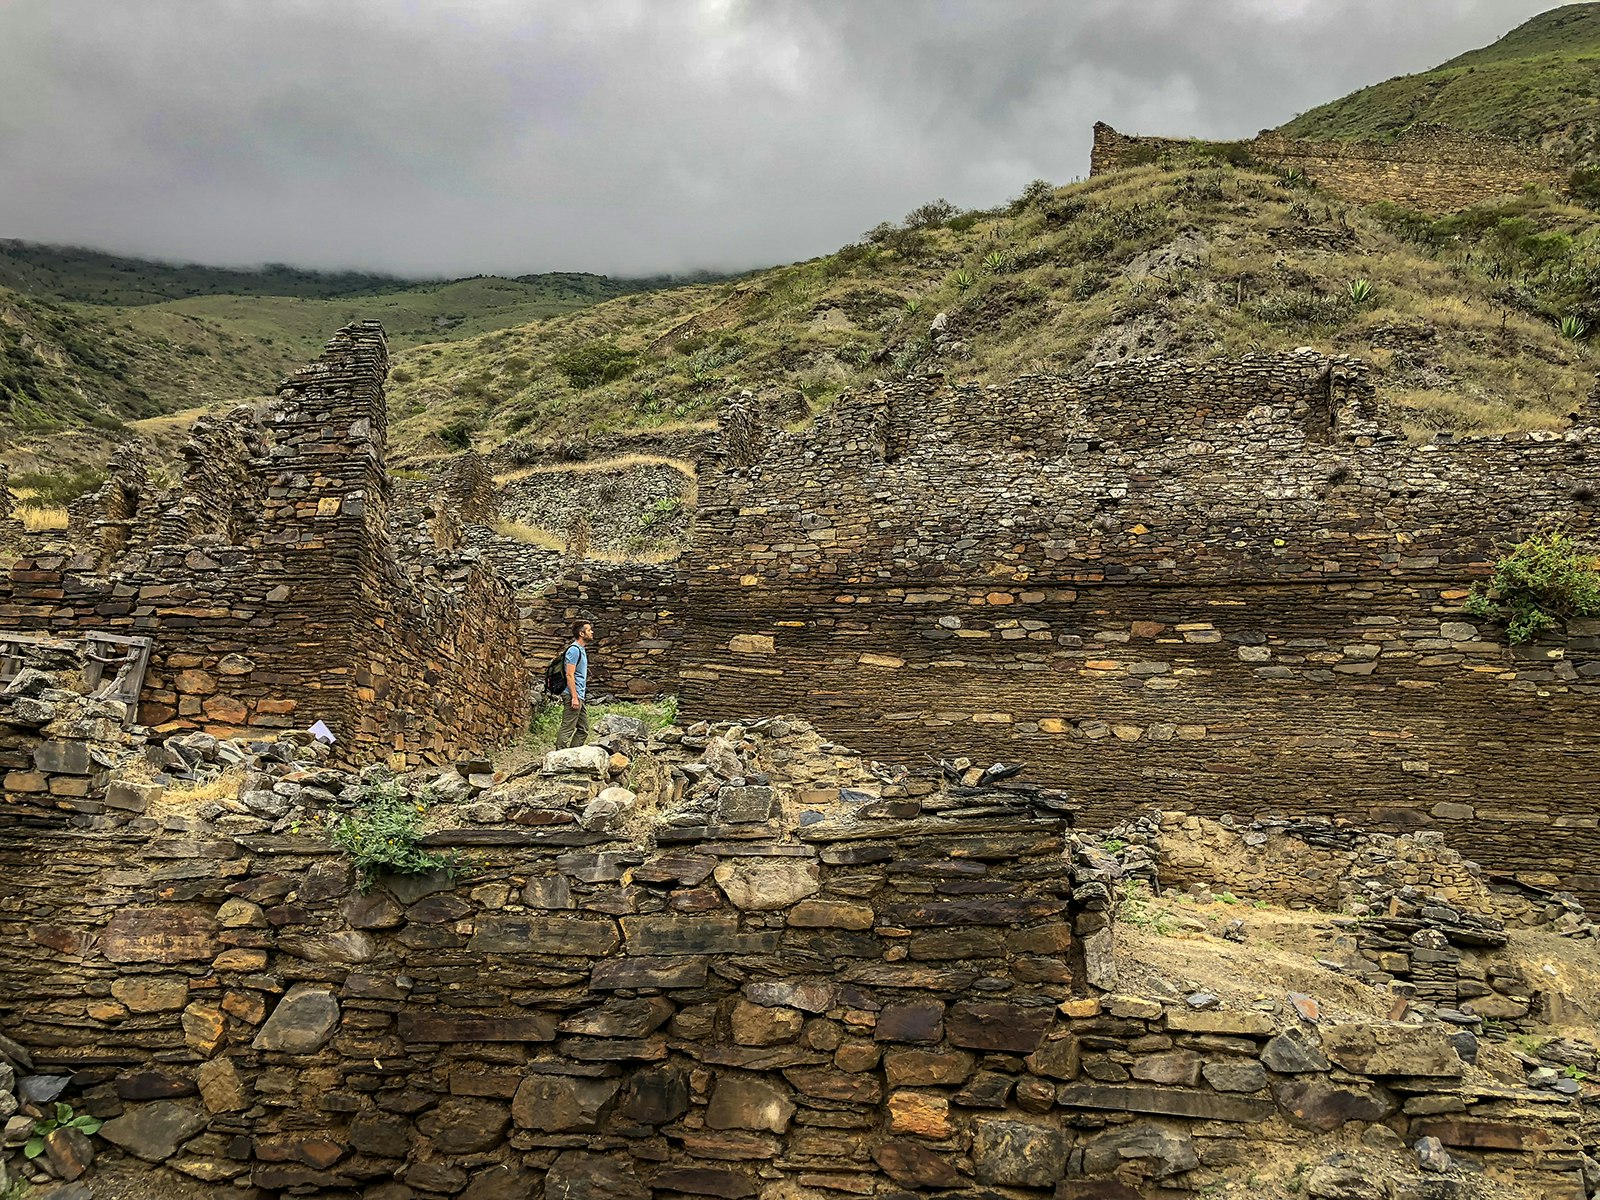 A man stands among ruined stone walls on a cloudy day in Iskanwaya, Bolivia